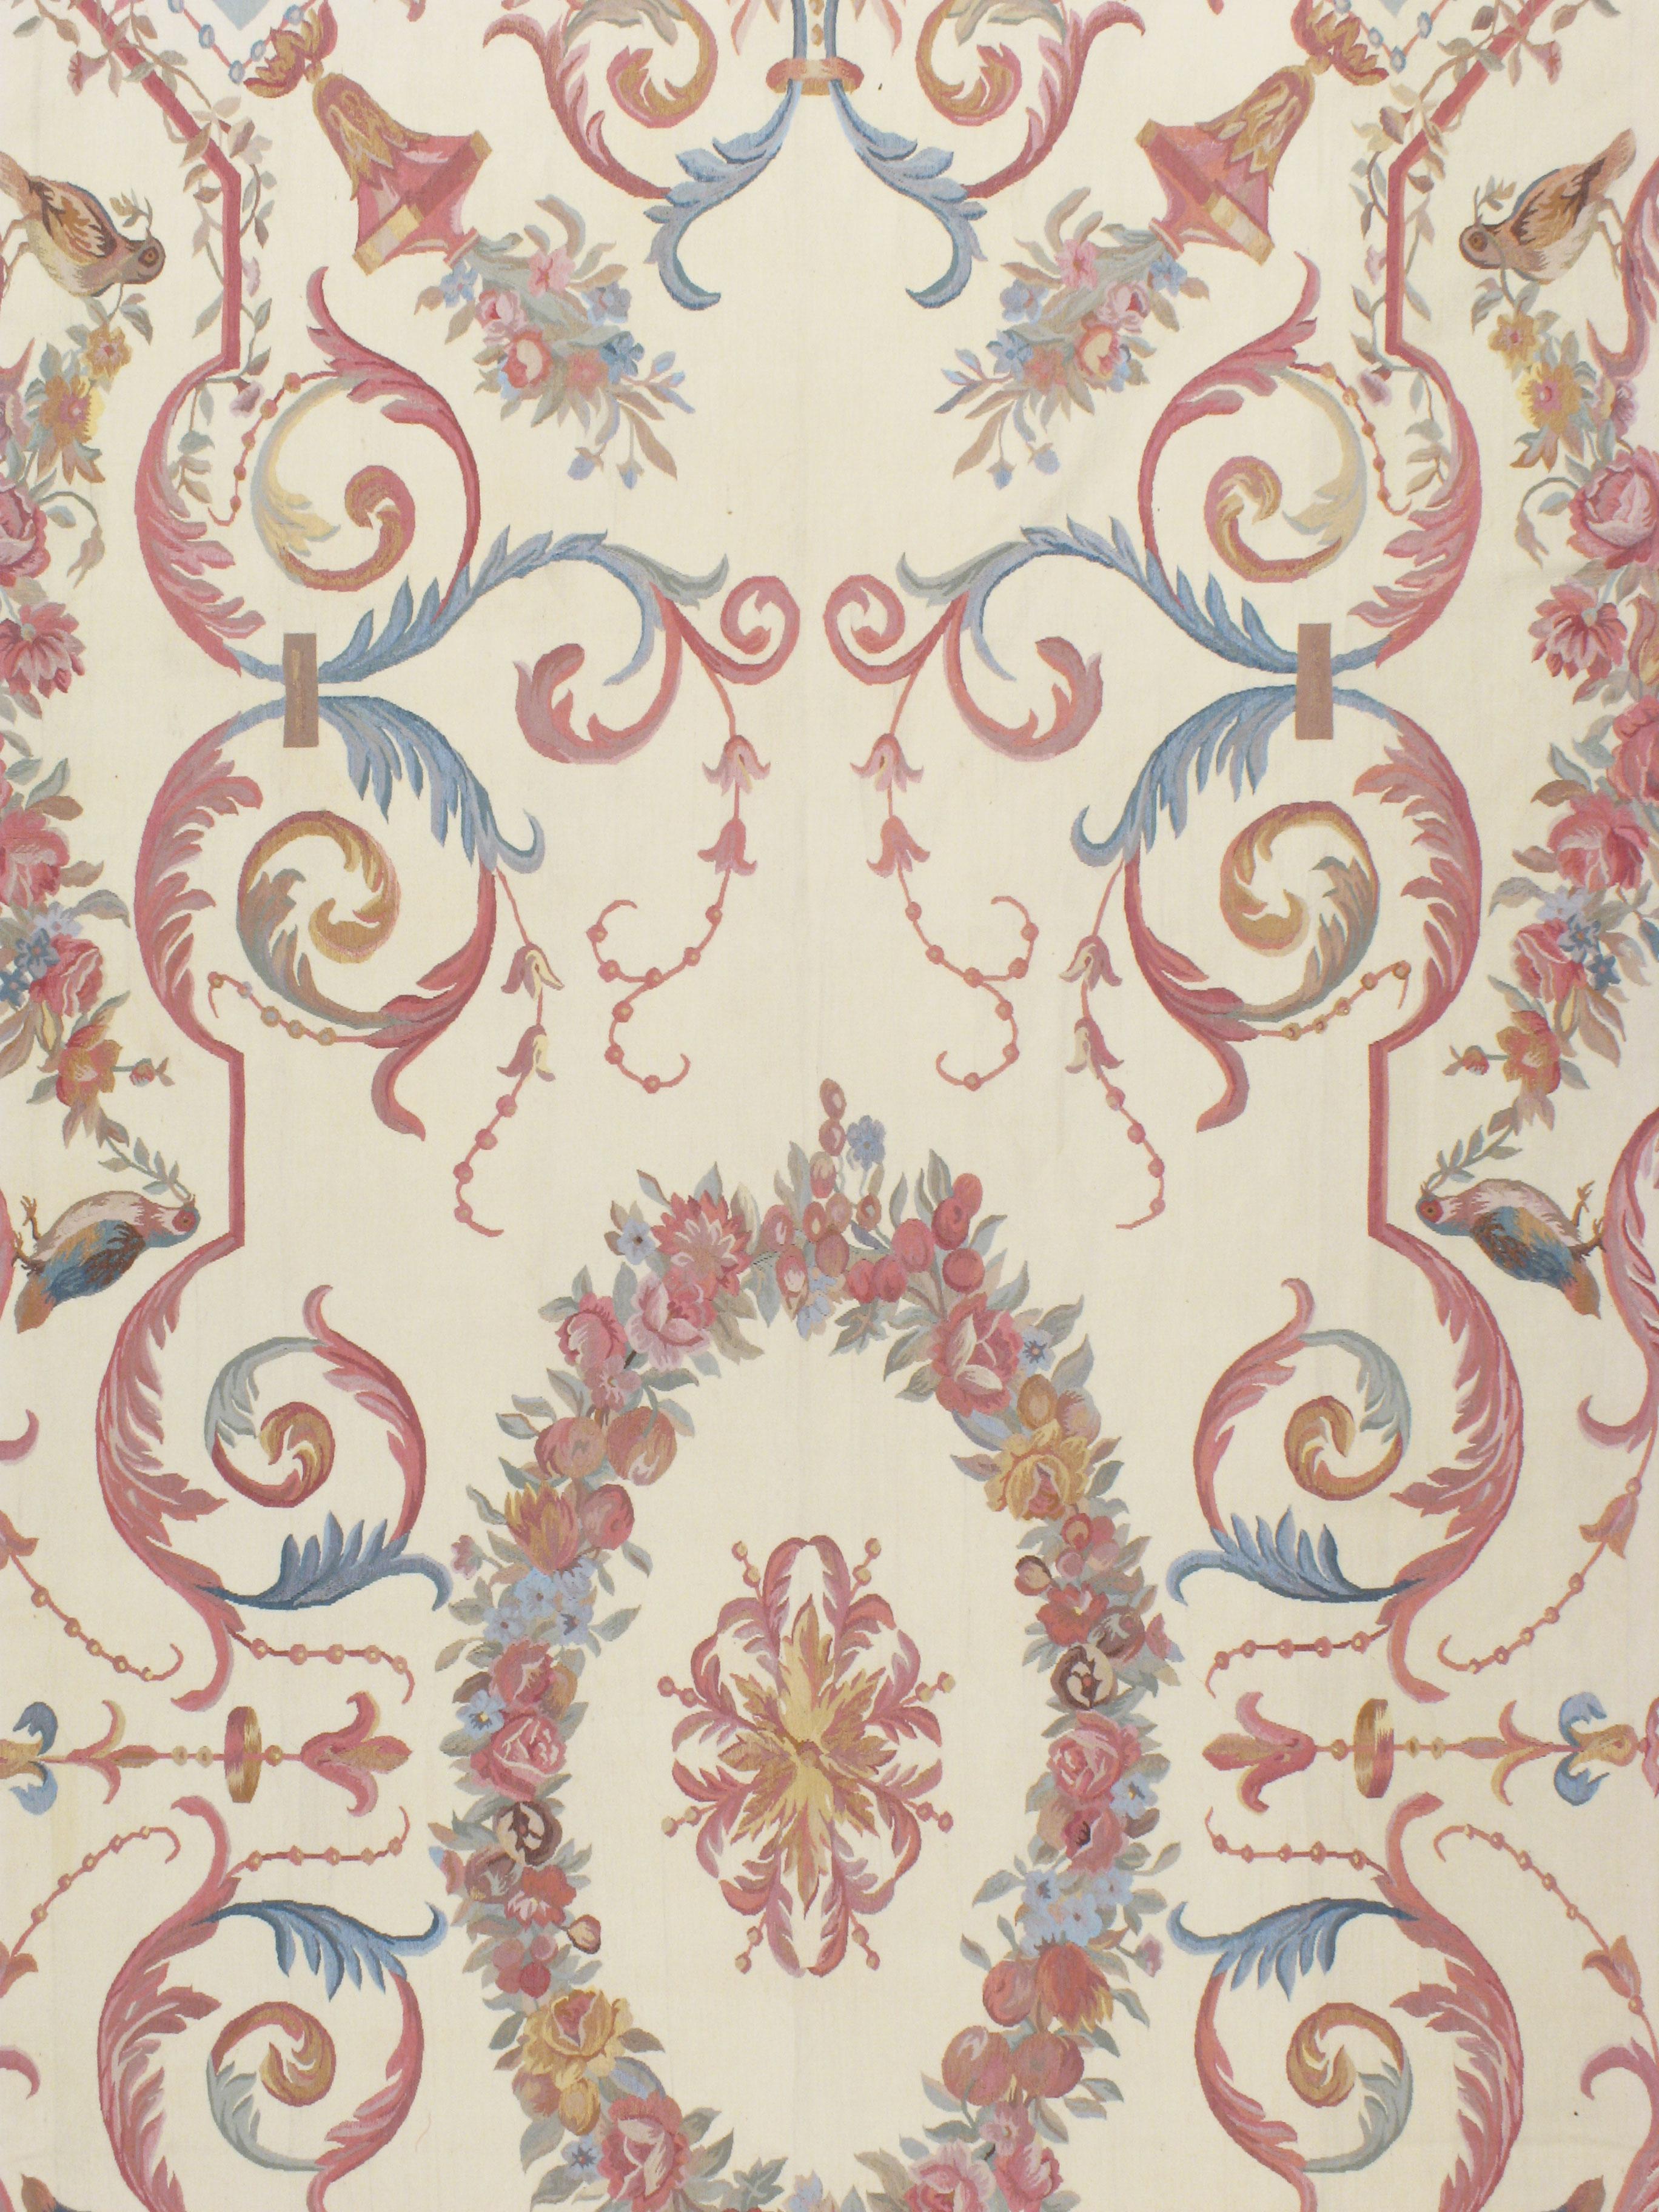 A handmade contemporary reproduction of the timeless French Aubusson carpet in the style of Louis XV. The floral pattern consists of colors including rose, blue, and grey, over an Ivory background. Grandeur in size and regal in design.